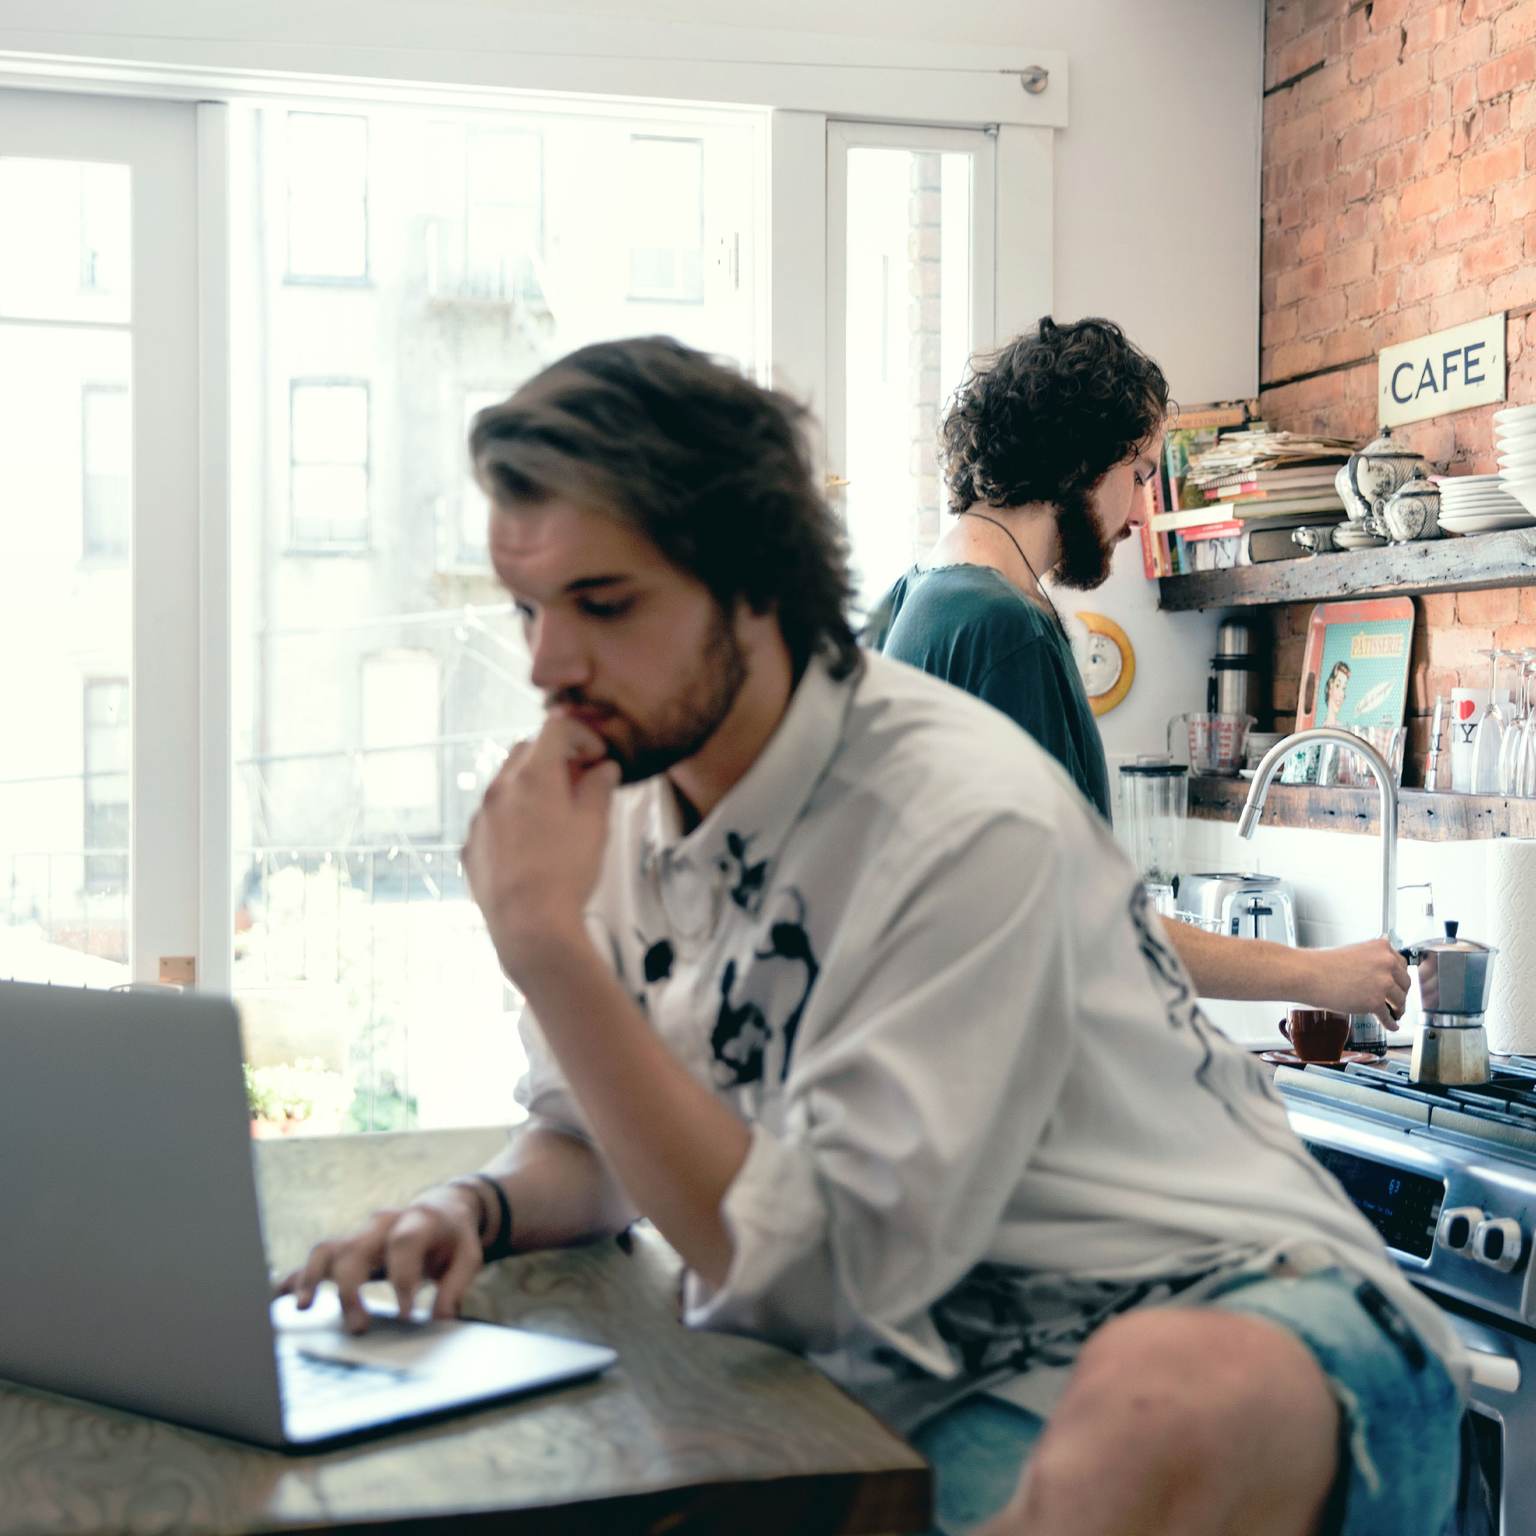 A man is sitting at a table working on a laptop. In the background, another man is making coffee.